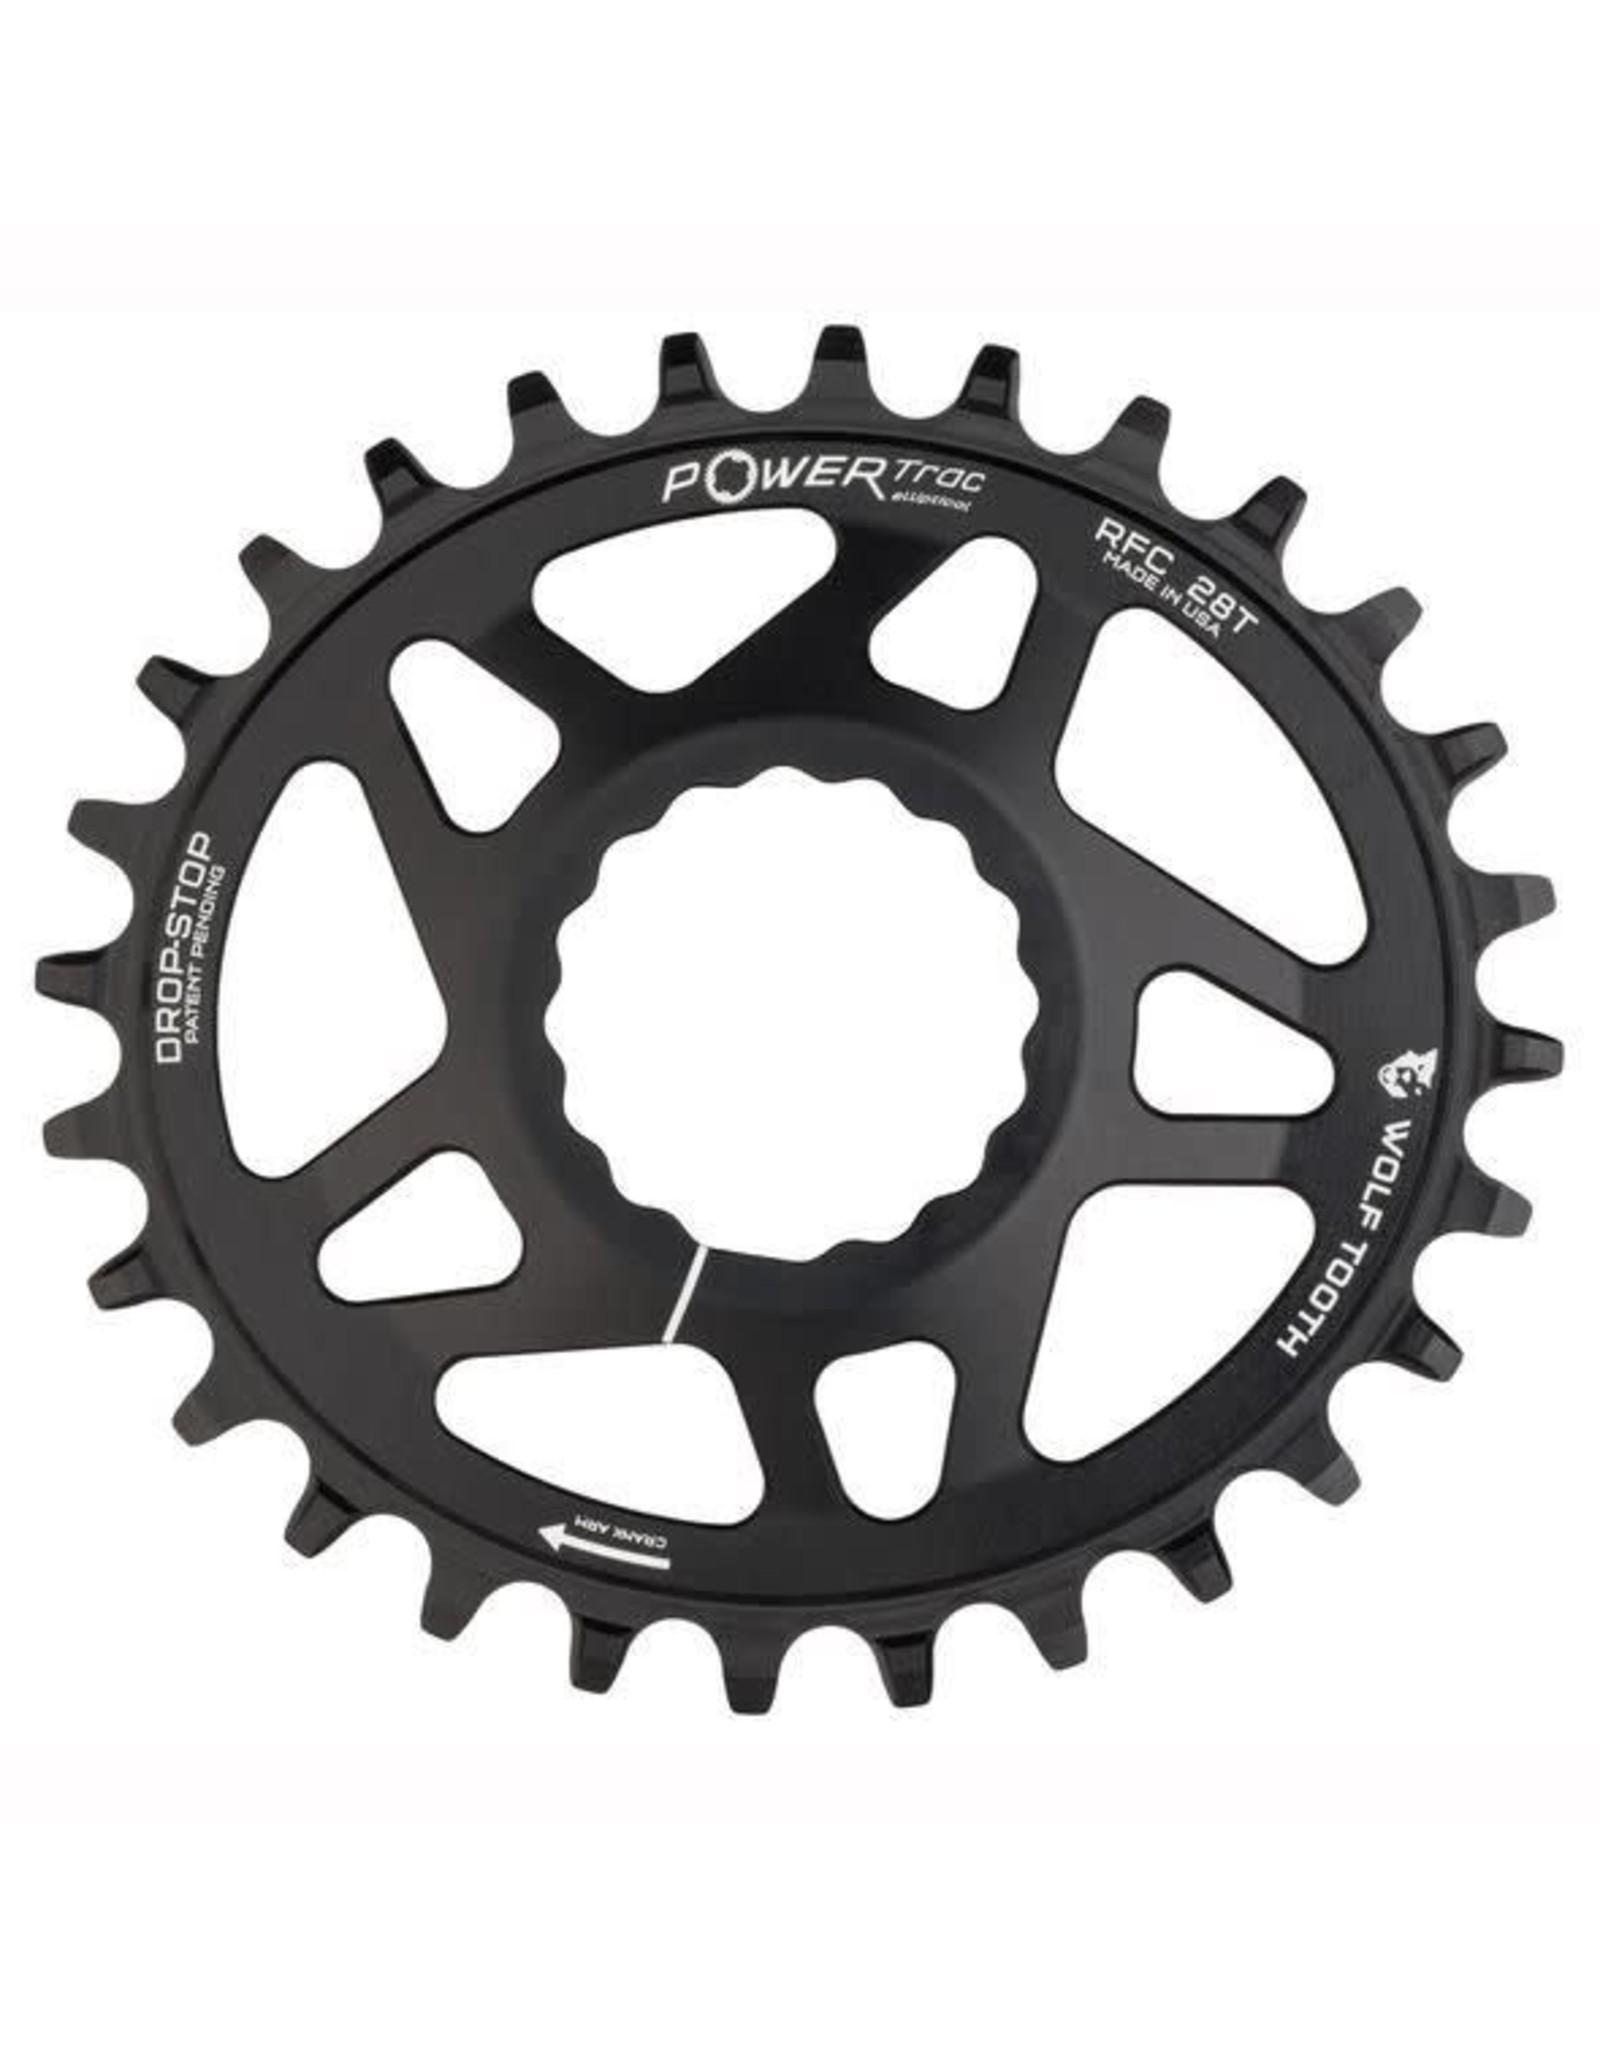 WOLF TOOTH WOLF TOOTH RACE FACE CINCH ELLIPTICAL 32T BOOST BLACK CHAINRING